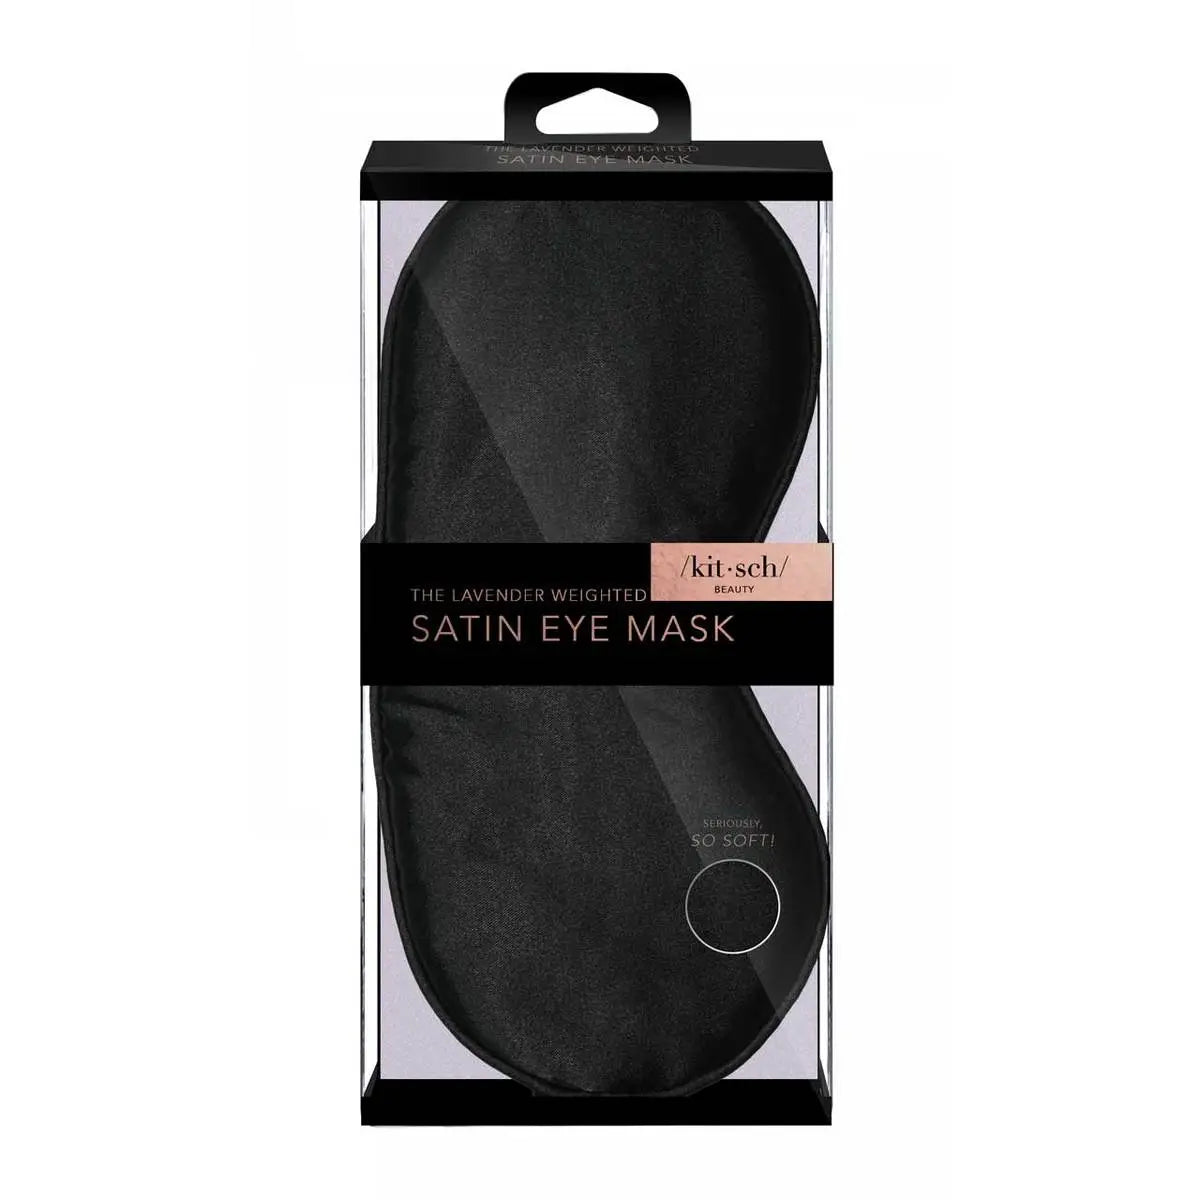 Kitsch - The Lavender Weighted Satin Eye Mask